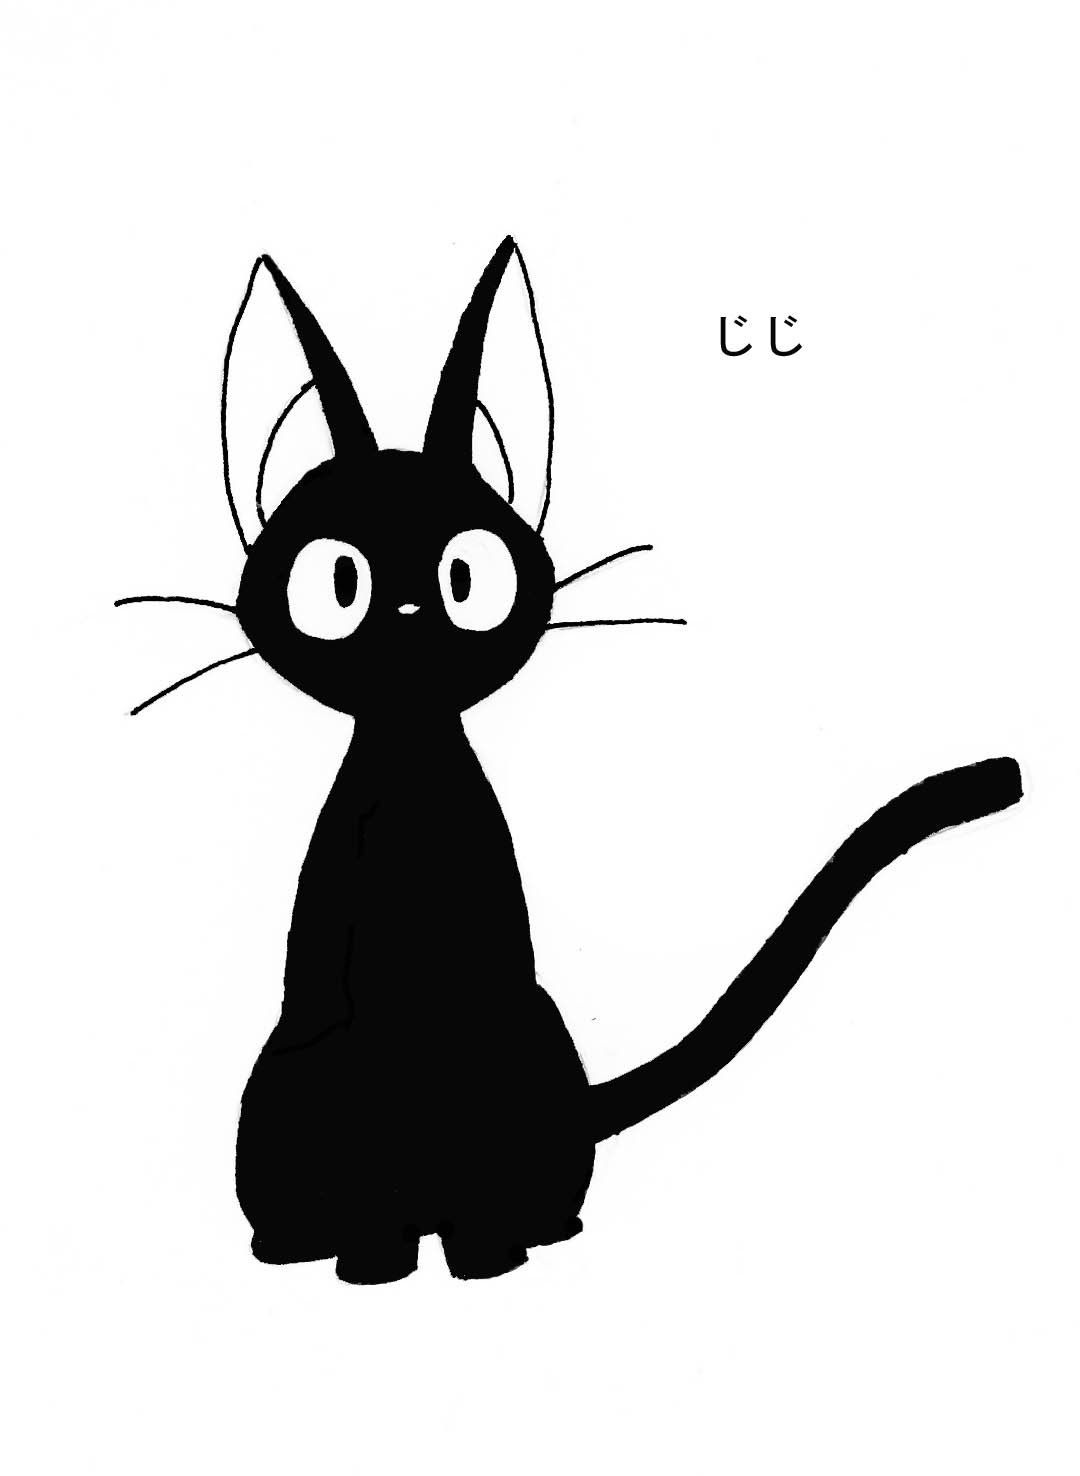 this is the cat from KiKi's delivery Service and it is soooo cute